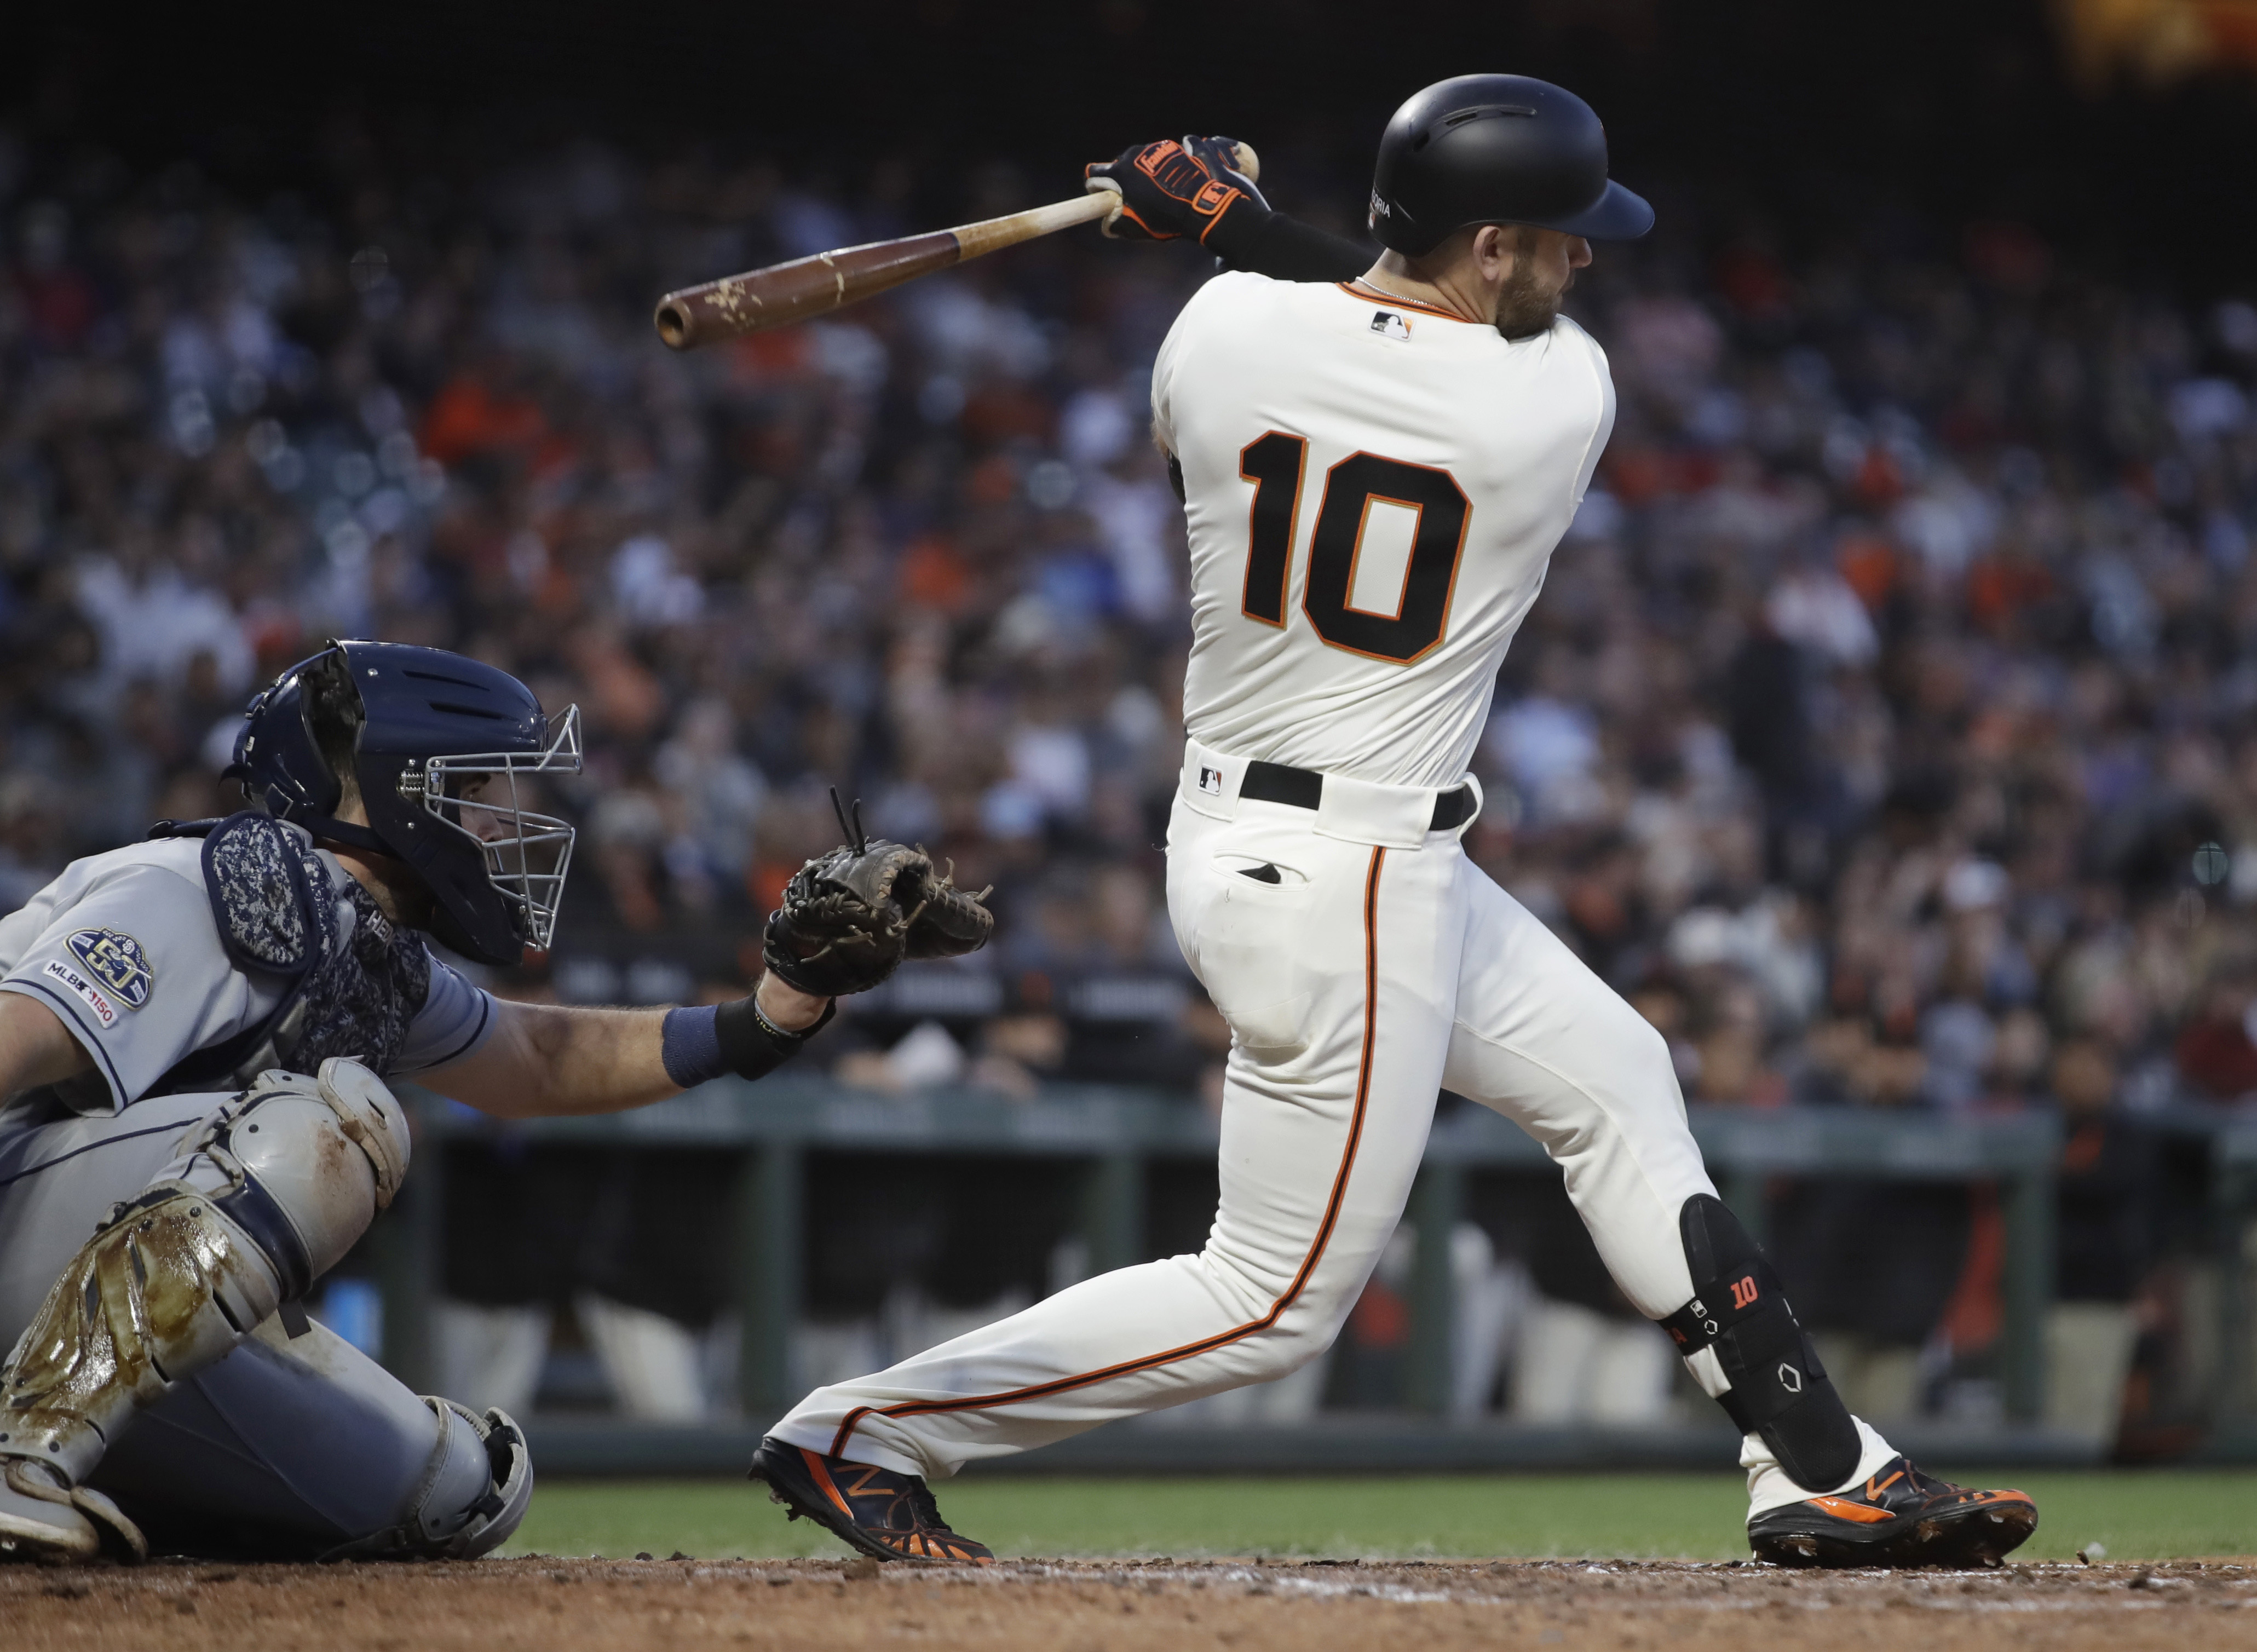 Giants hold on in 9th to beat Padres 4-2